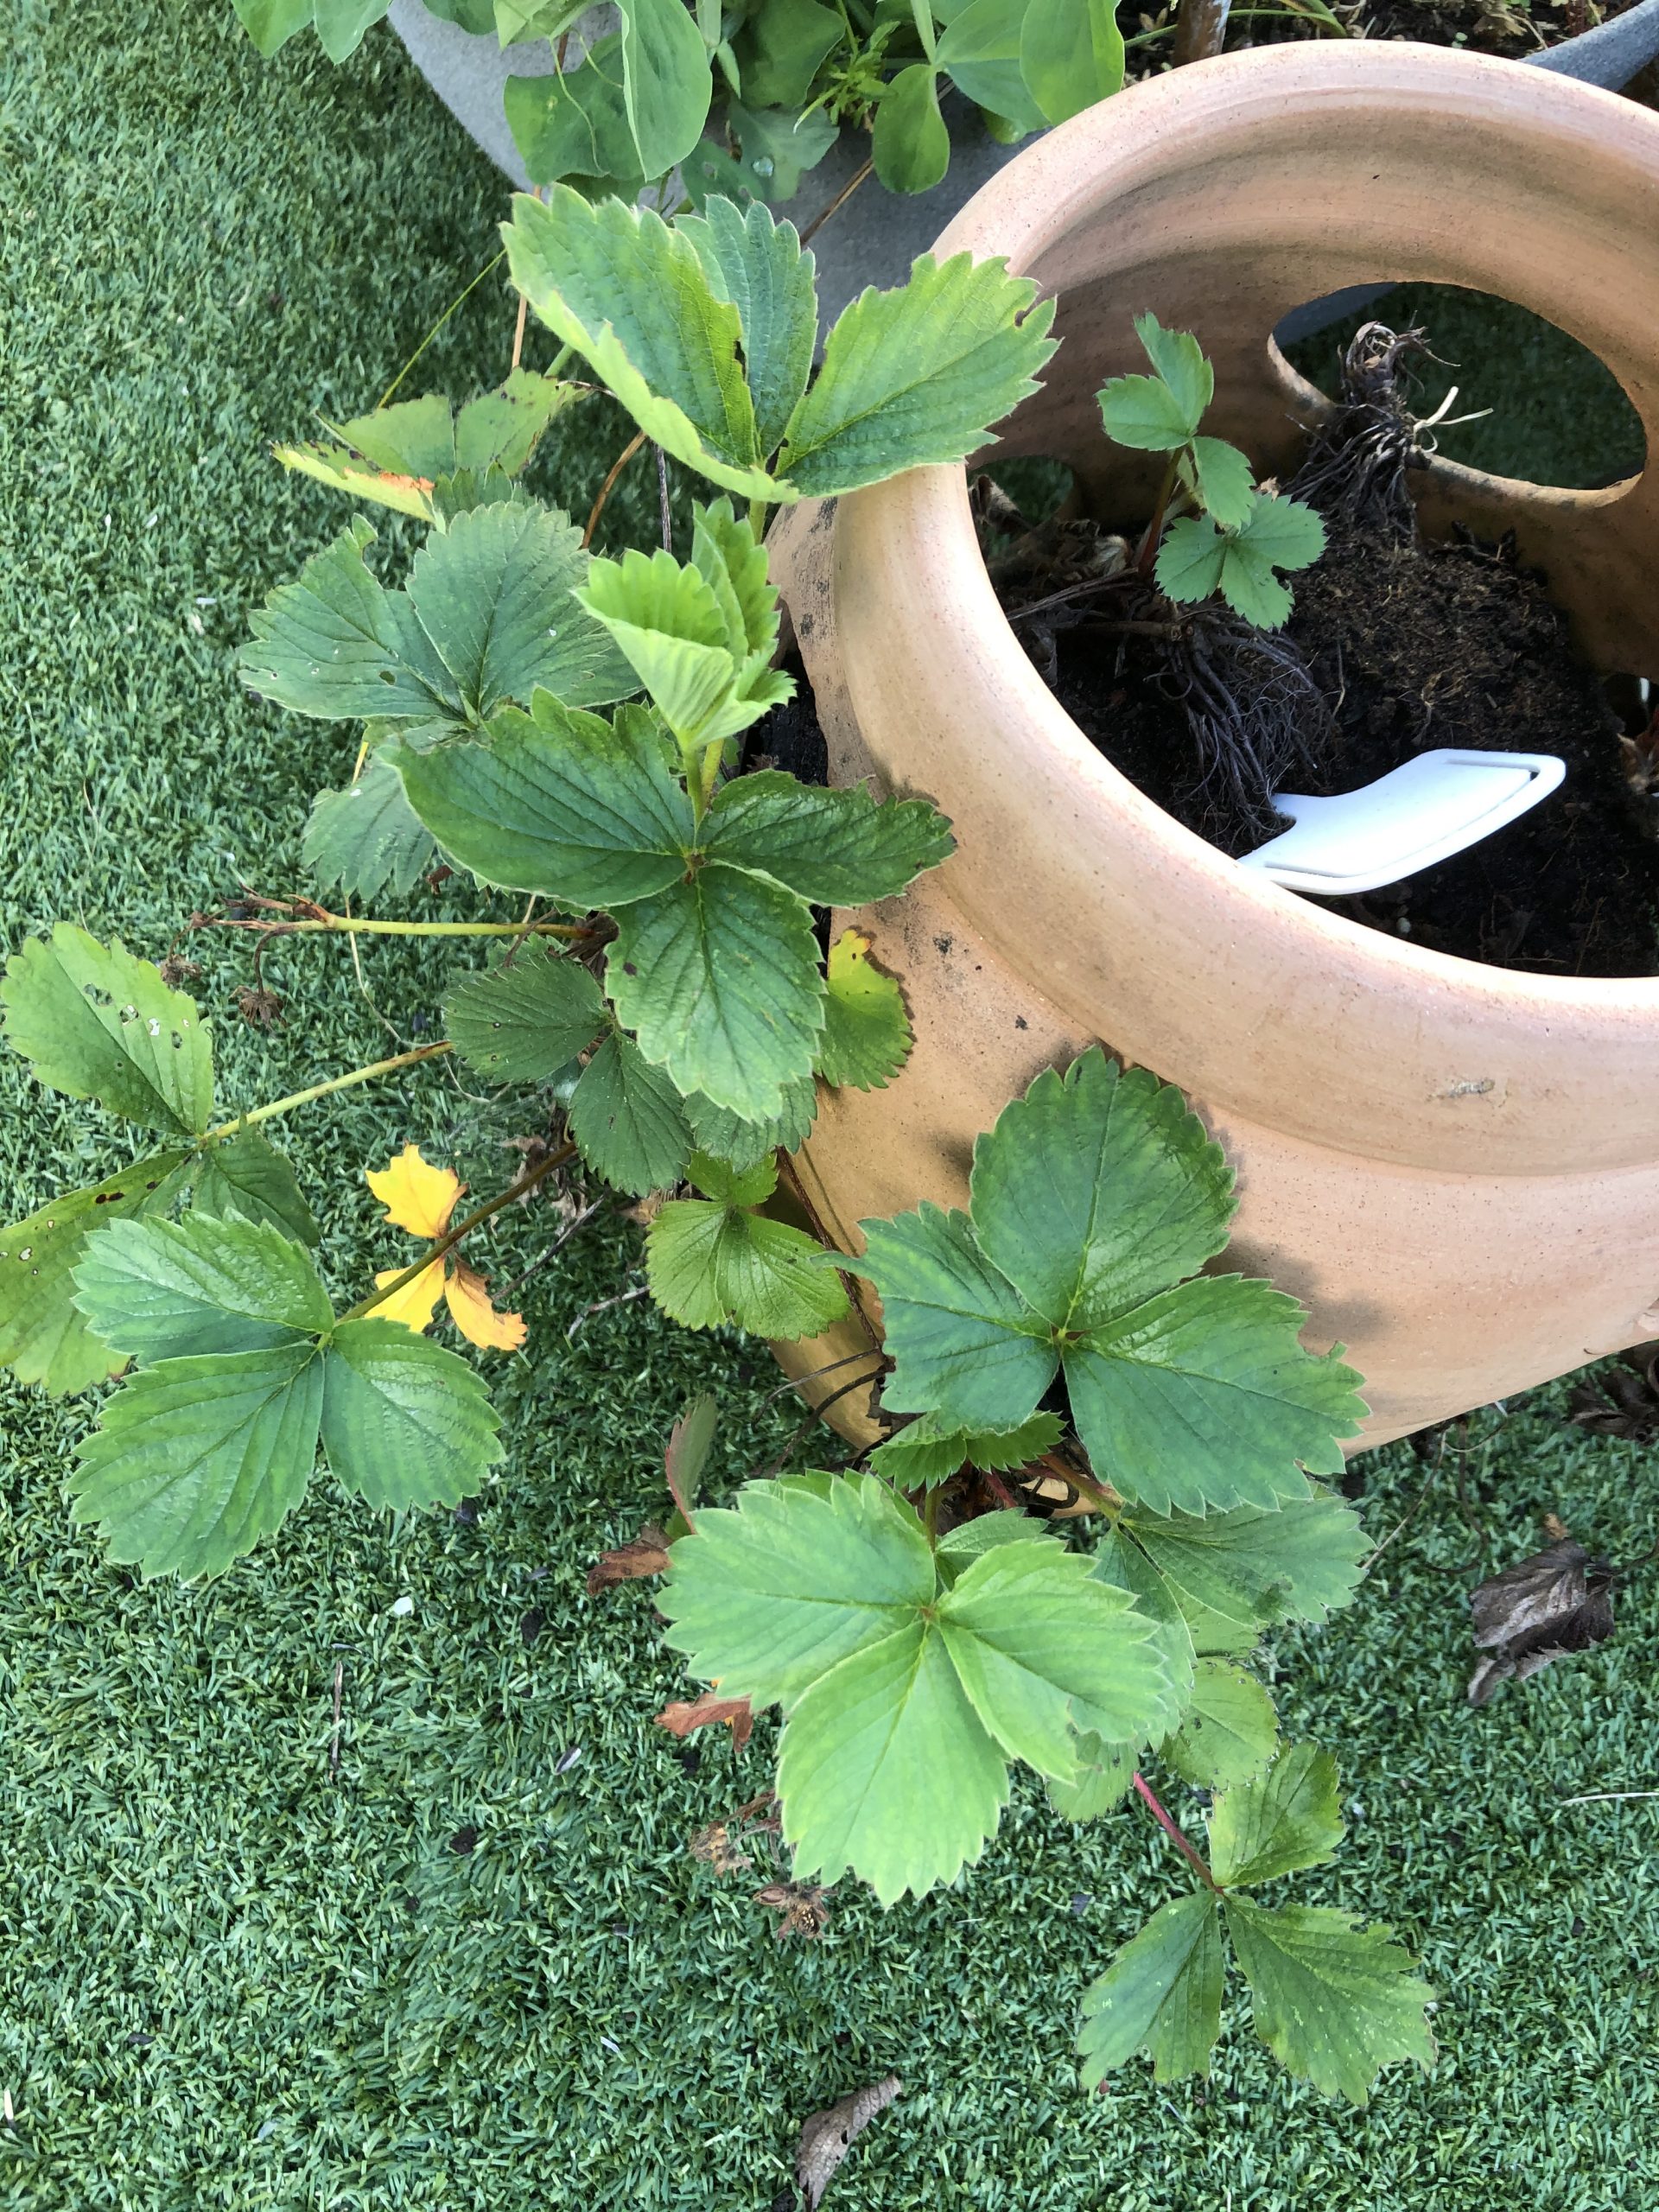 trying to grow strawberries in a strawberry pot - compost being wash out when watering plants